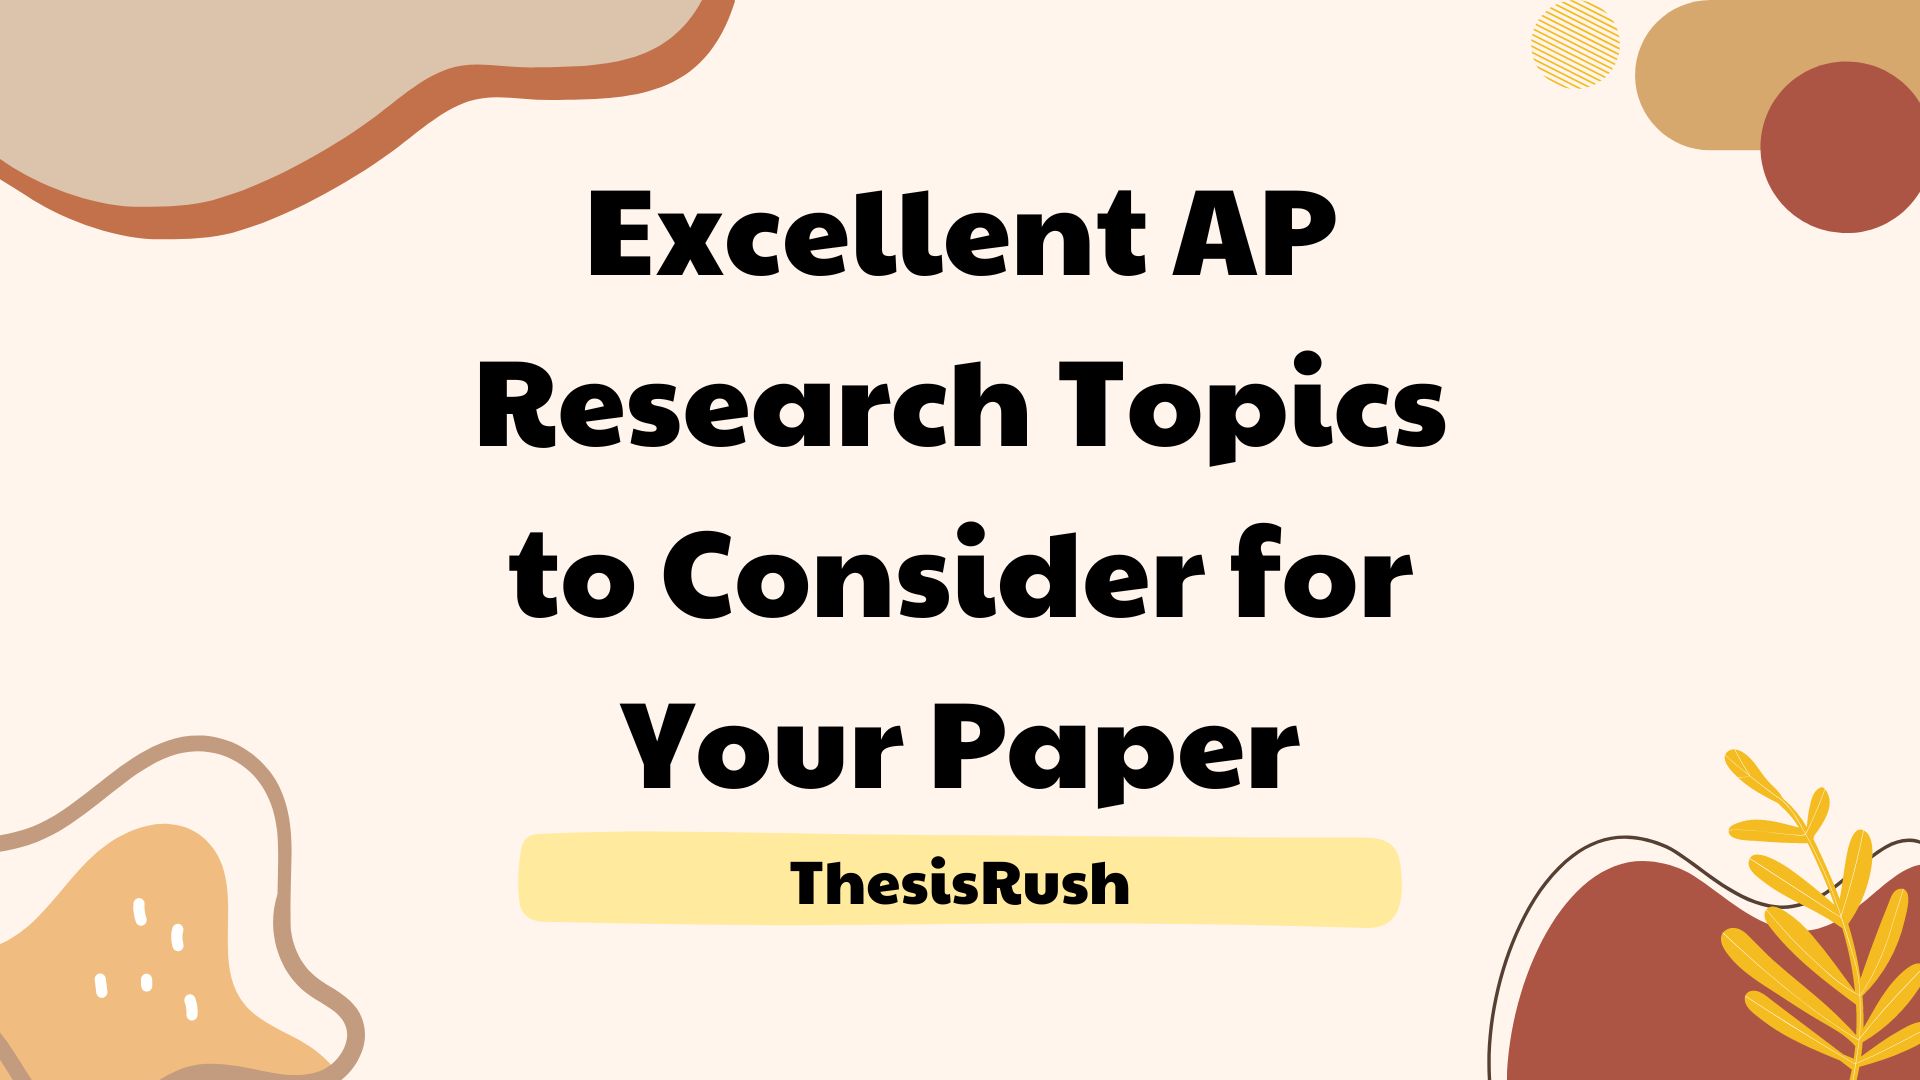 Excellent AP Research Topics to Consider for Your Paper